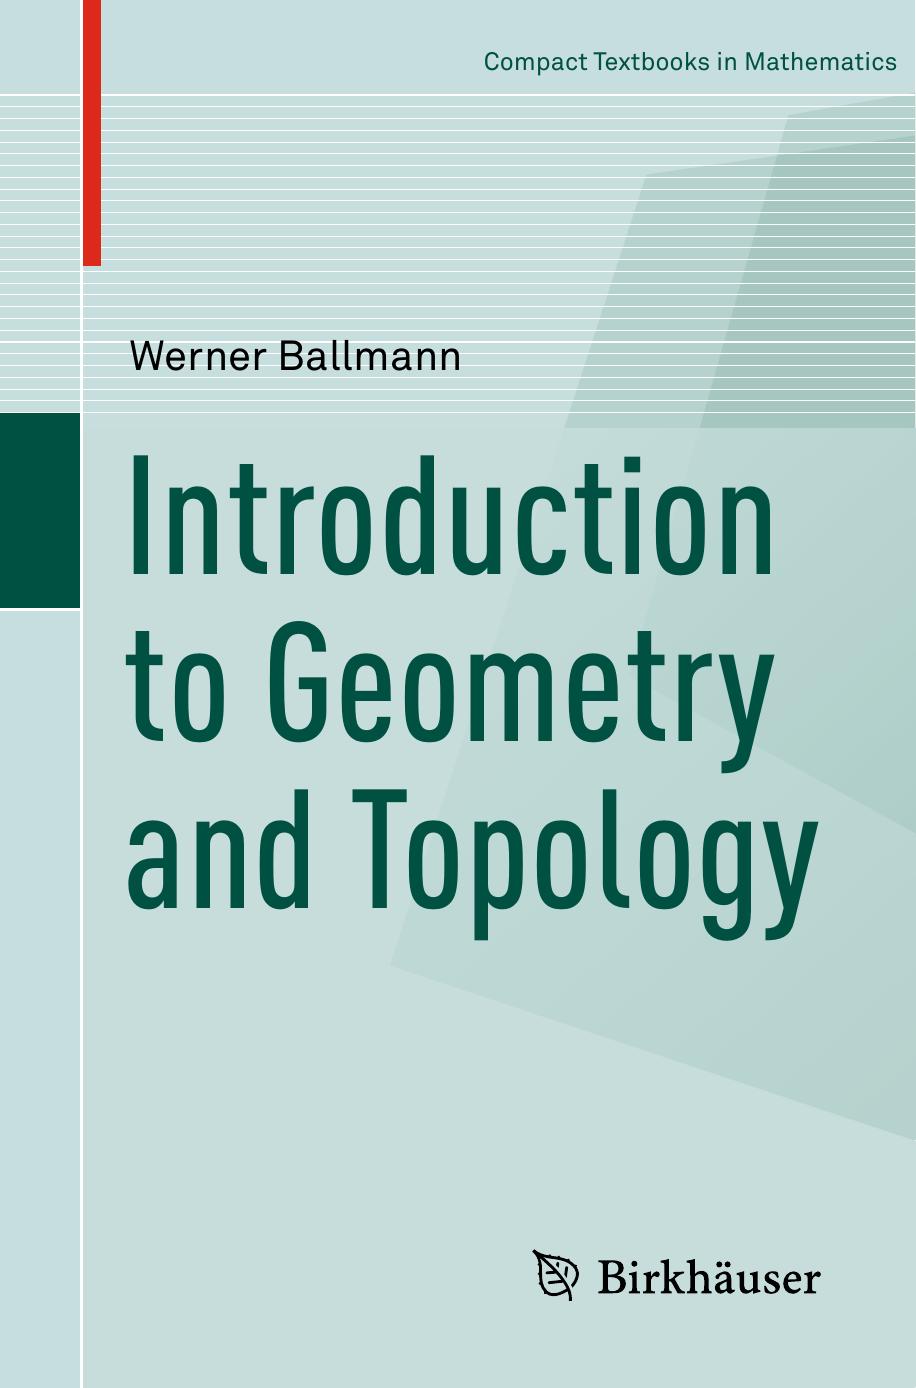 Introduction to Geometry and Topology by Werner Ballmann